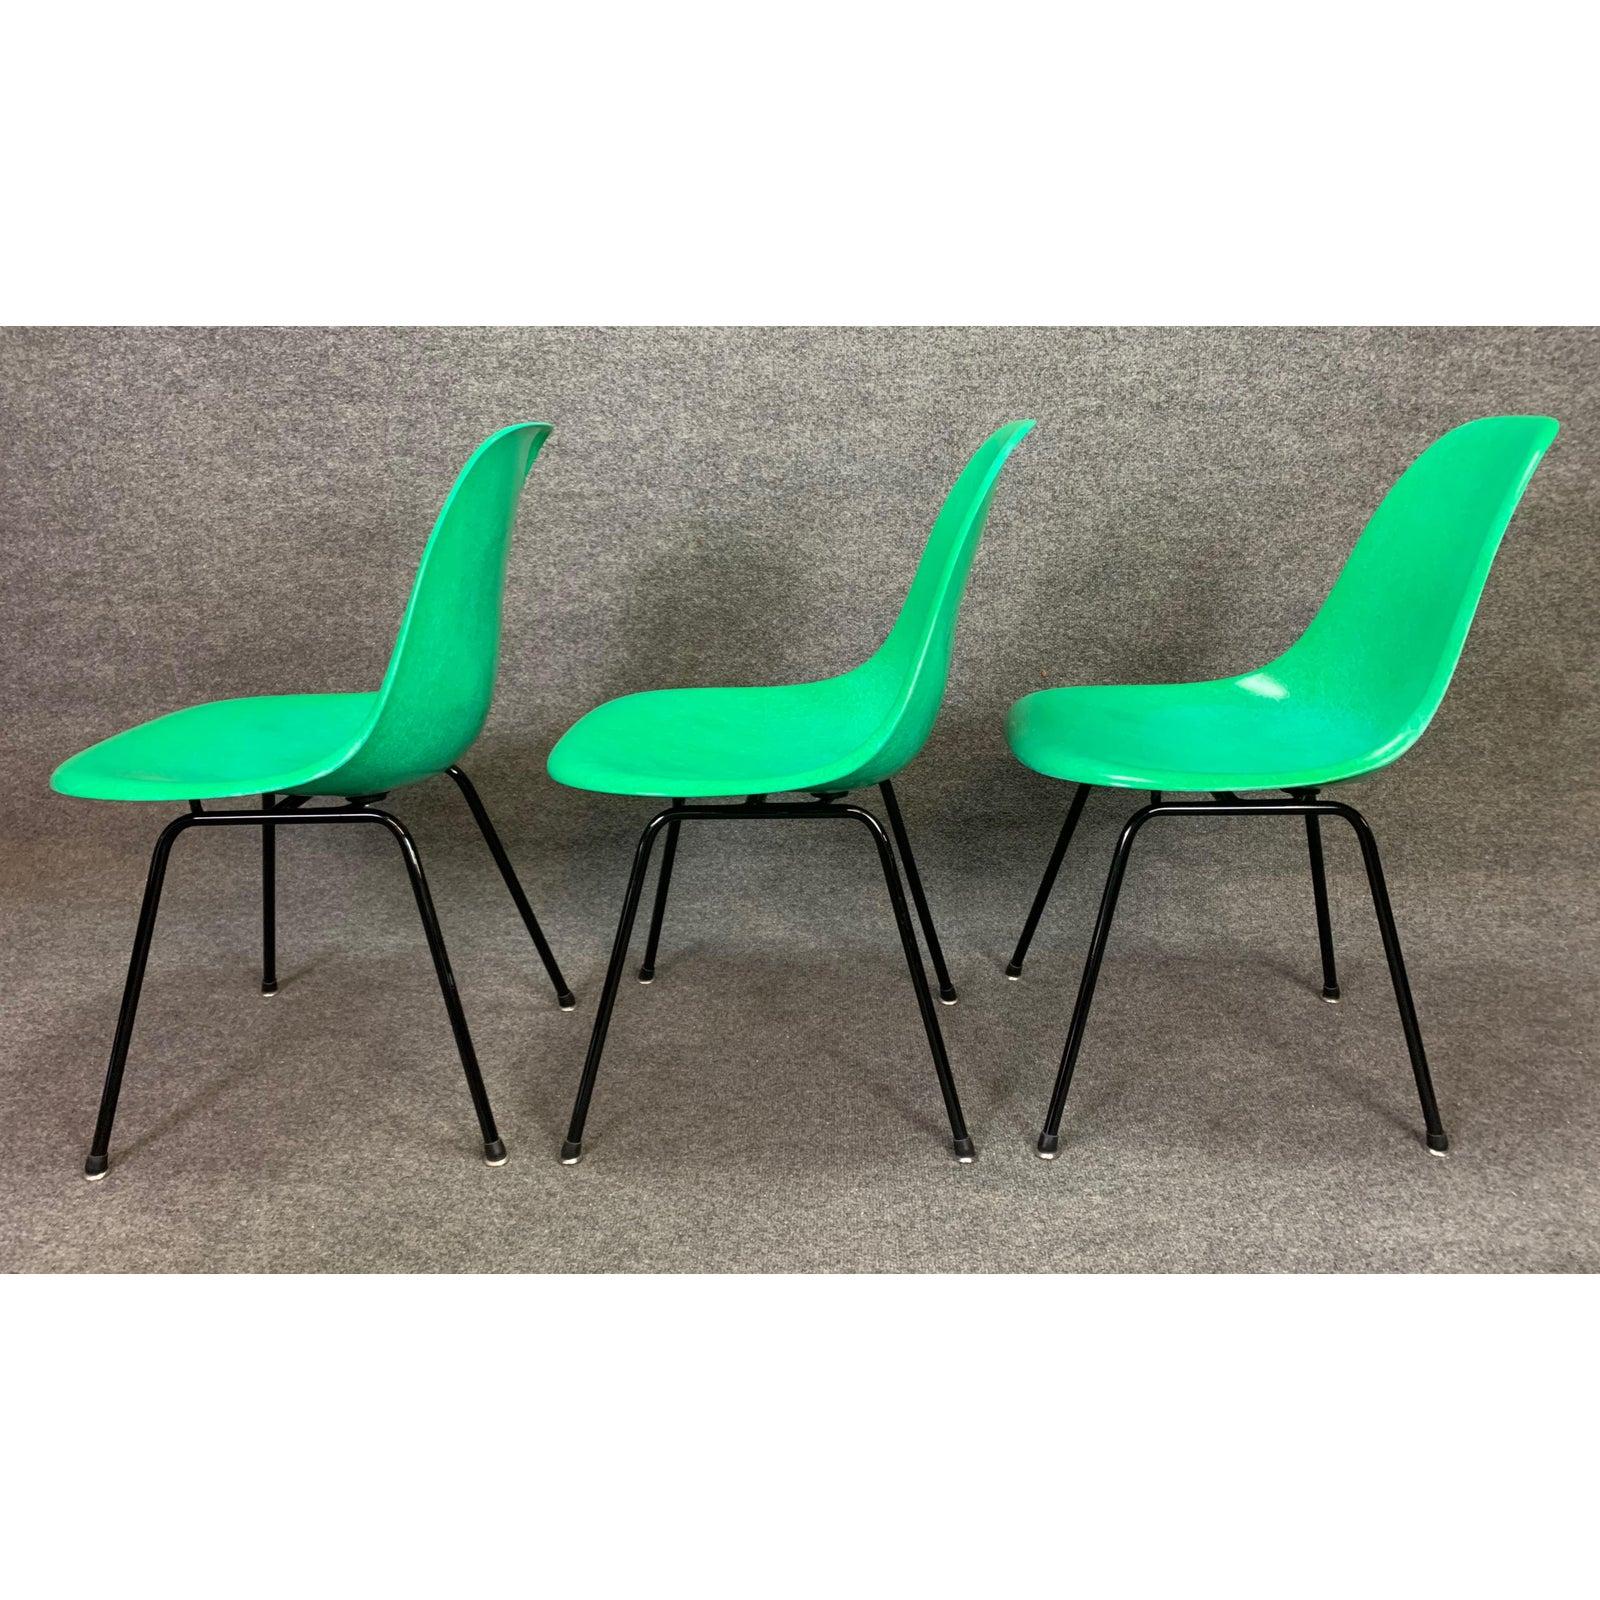 Set of 6 Midcentury DSX Fiberglass Chairs by Charles Eames for Herman Miller 2